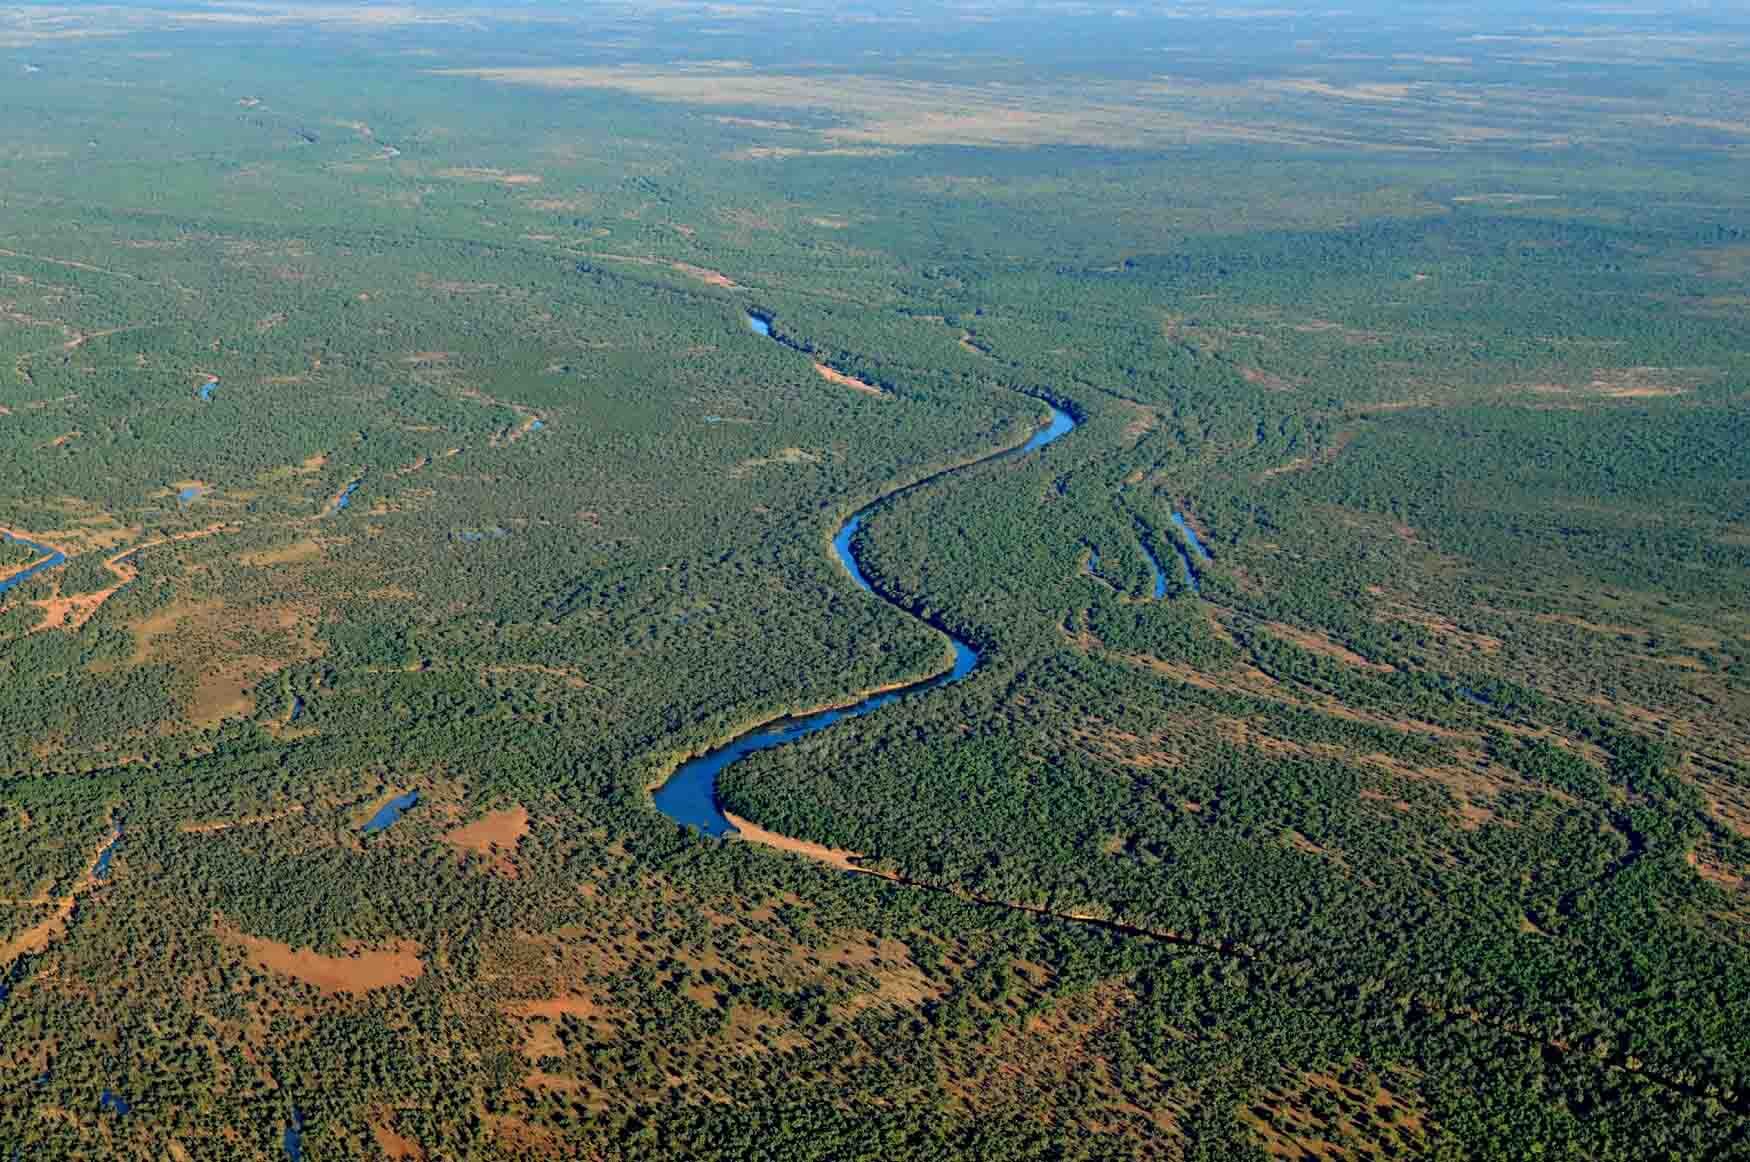 The Fitzroy River and its branches hold considerable heritage and conservation value, but its floodplains also have appeal for large scale irrigation interests. (Image by Magali McDuffie)